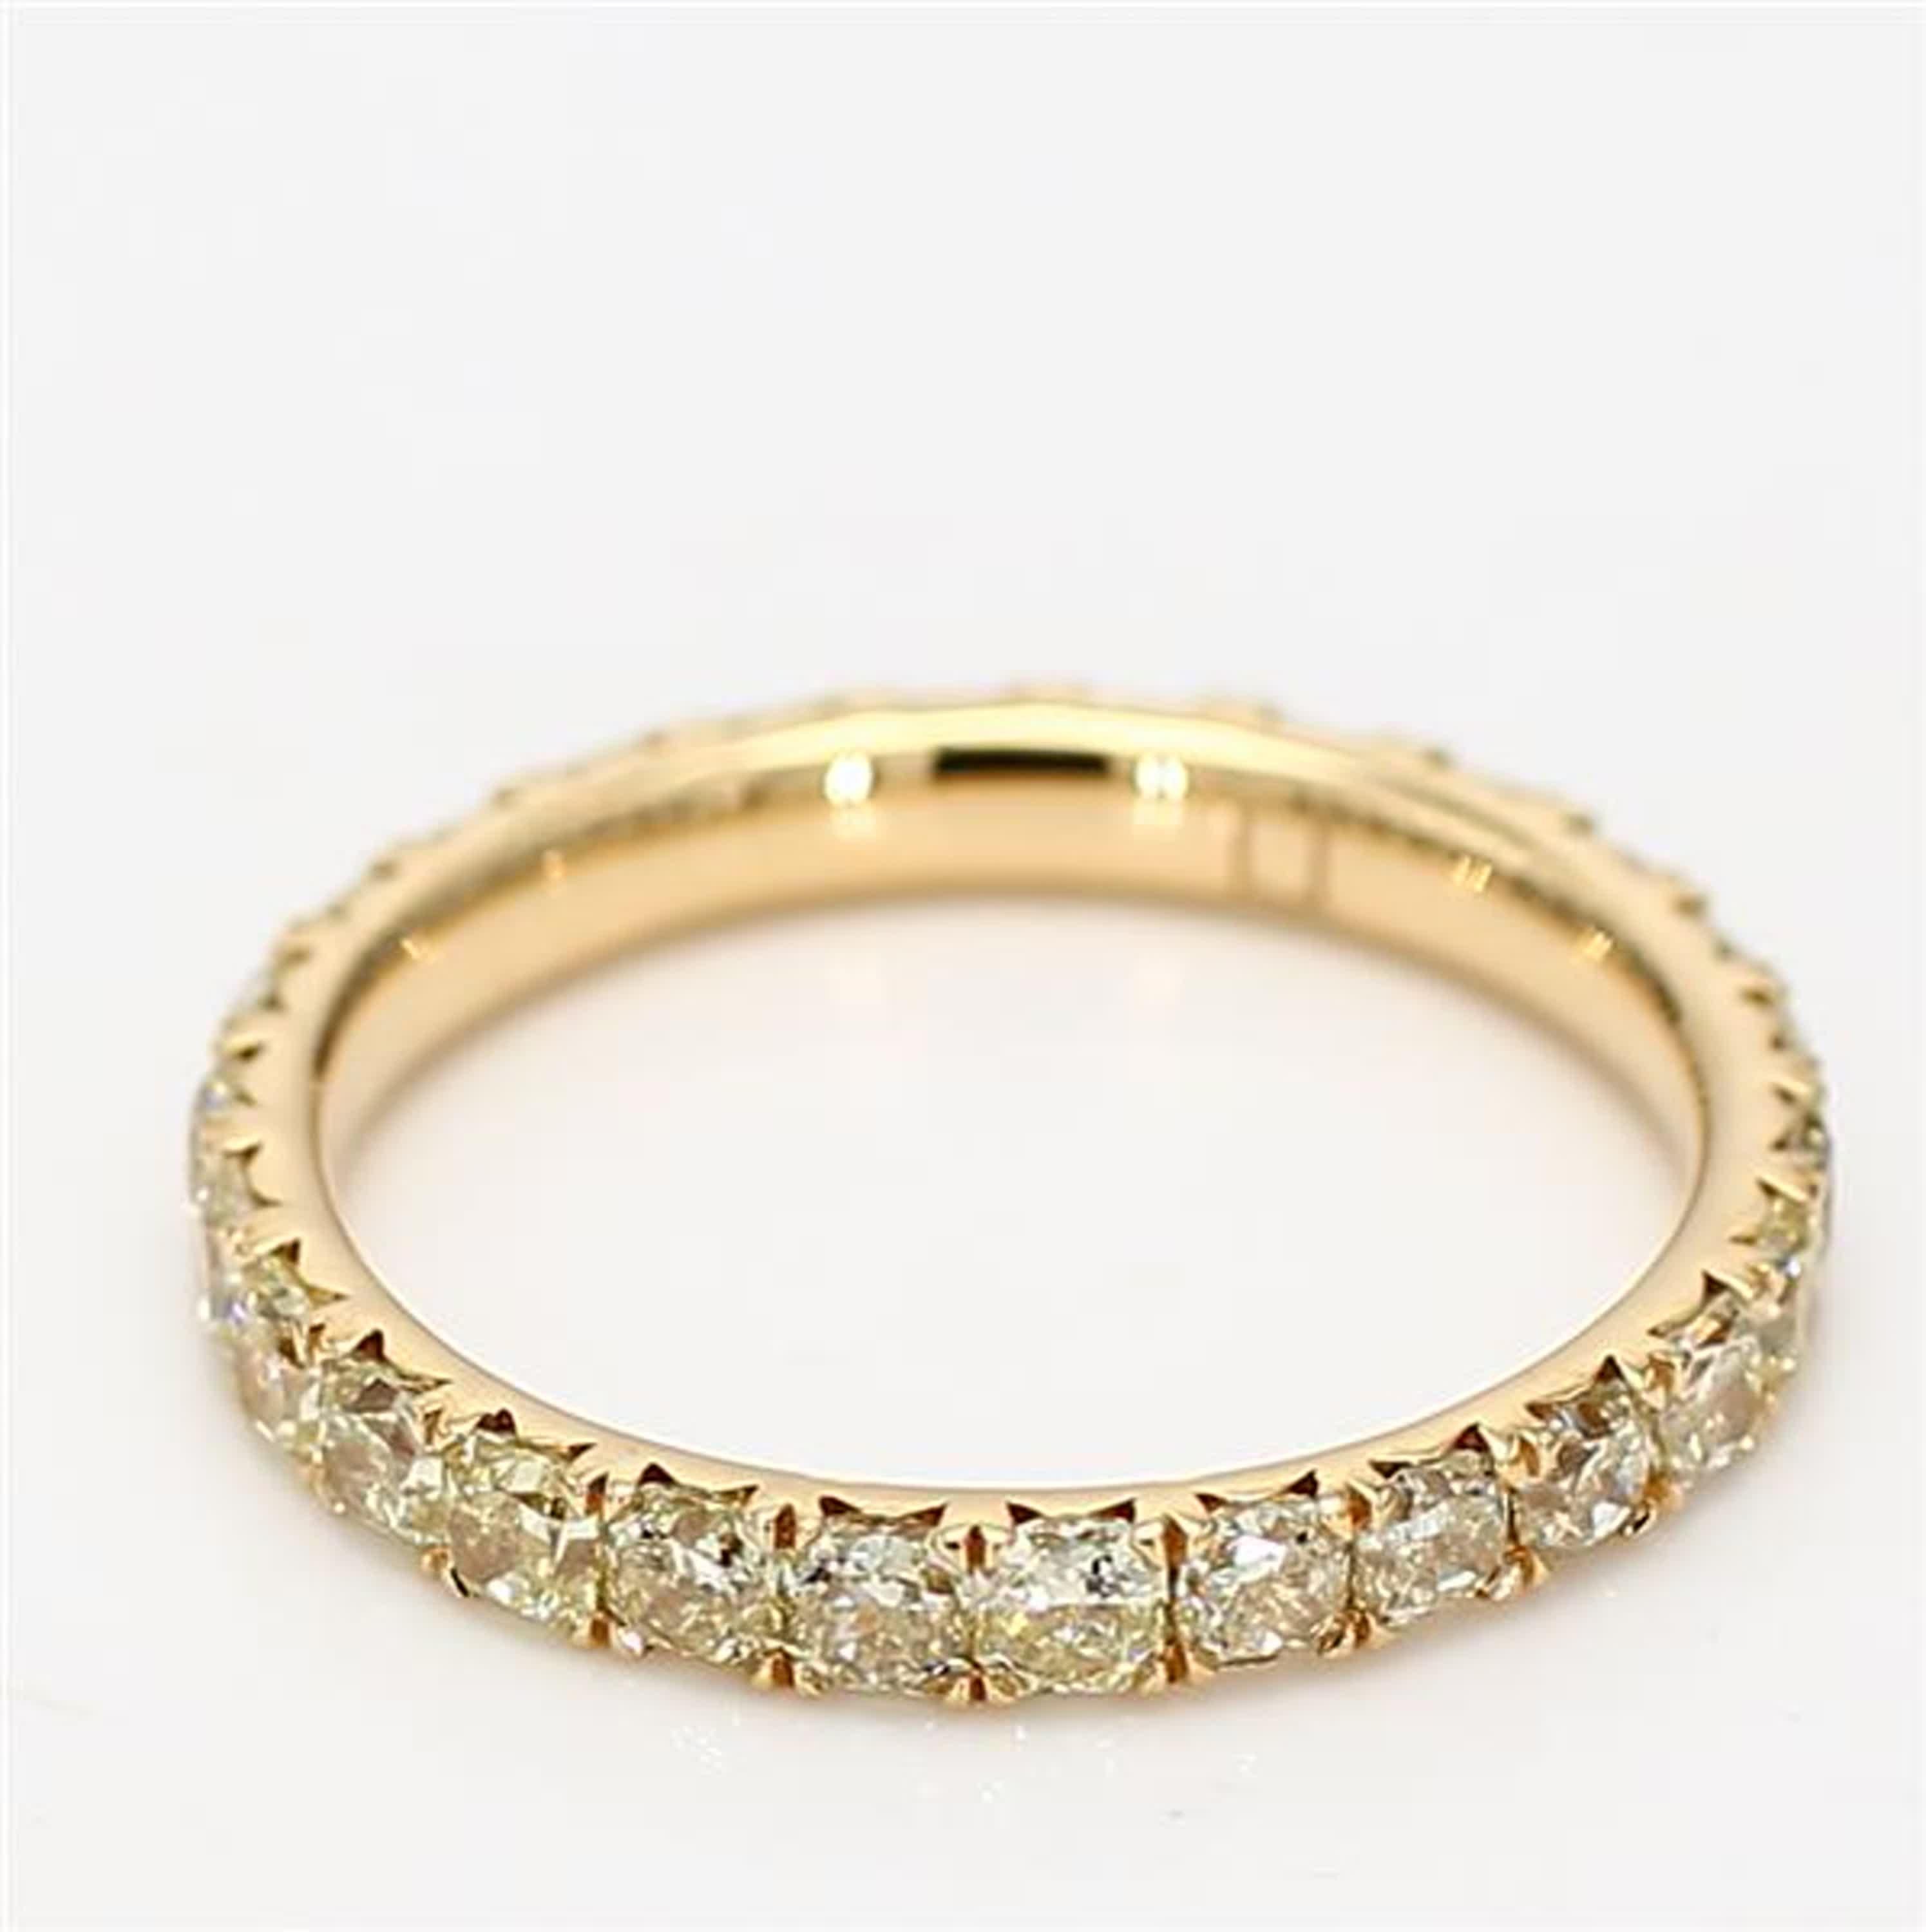 Contemporary Natural Yellow Radiant Diamond 1.66 Carat TW Yellow Gold Eternity Band